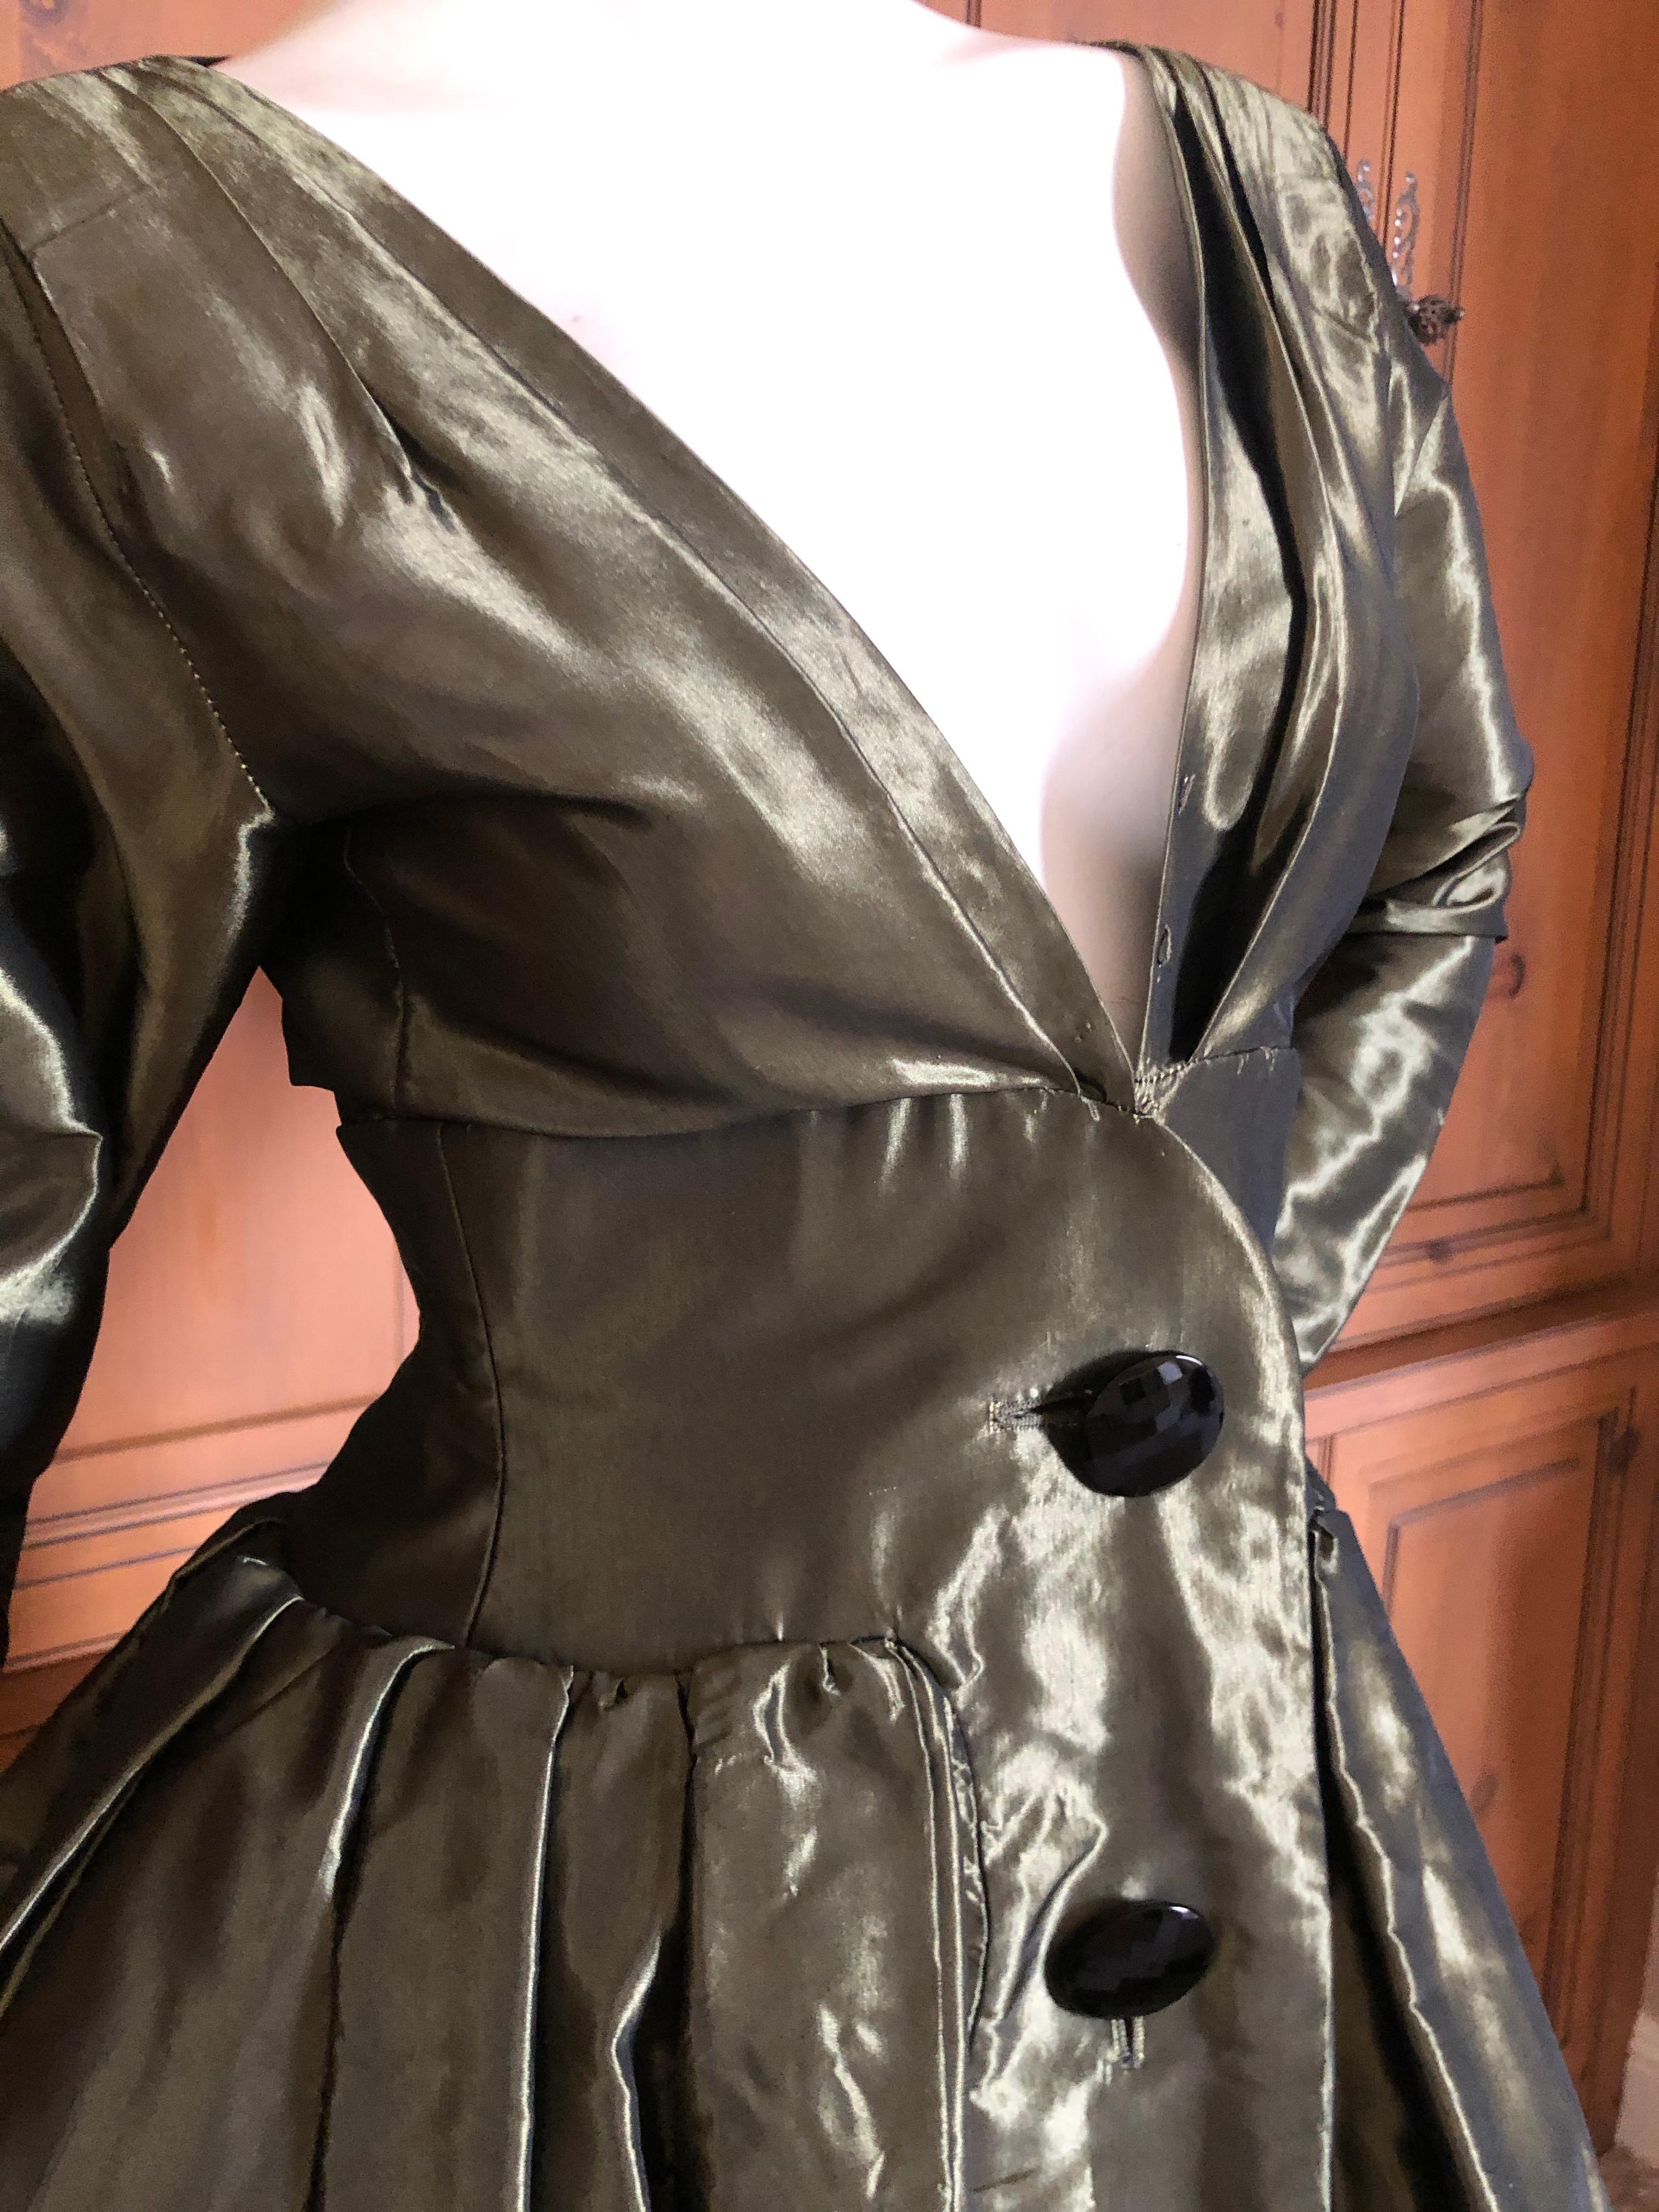 Yves Saint Laurent Rive Gauche 1970's Low Cut Metallic Taffeta Pleated Dress In Excellent Condition For Sale In Cloverdale, CA